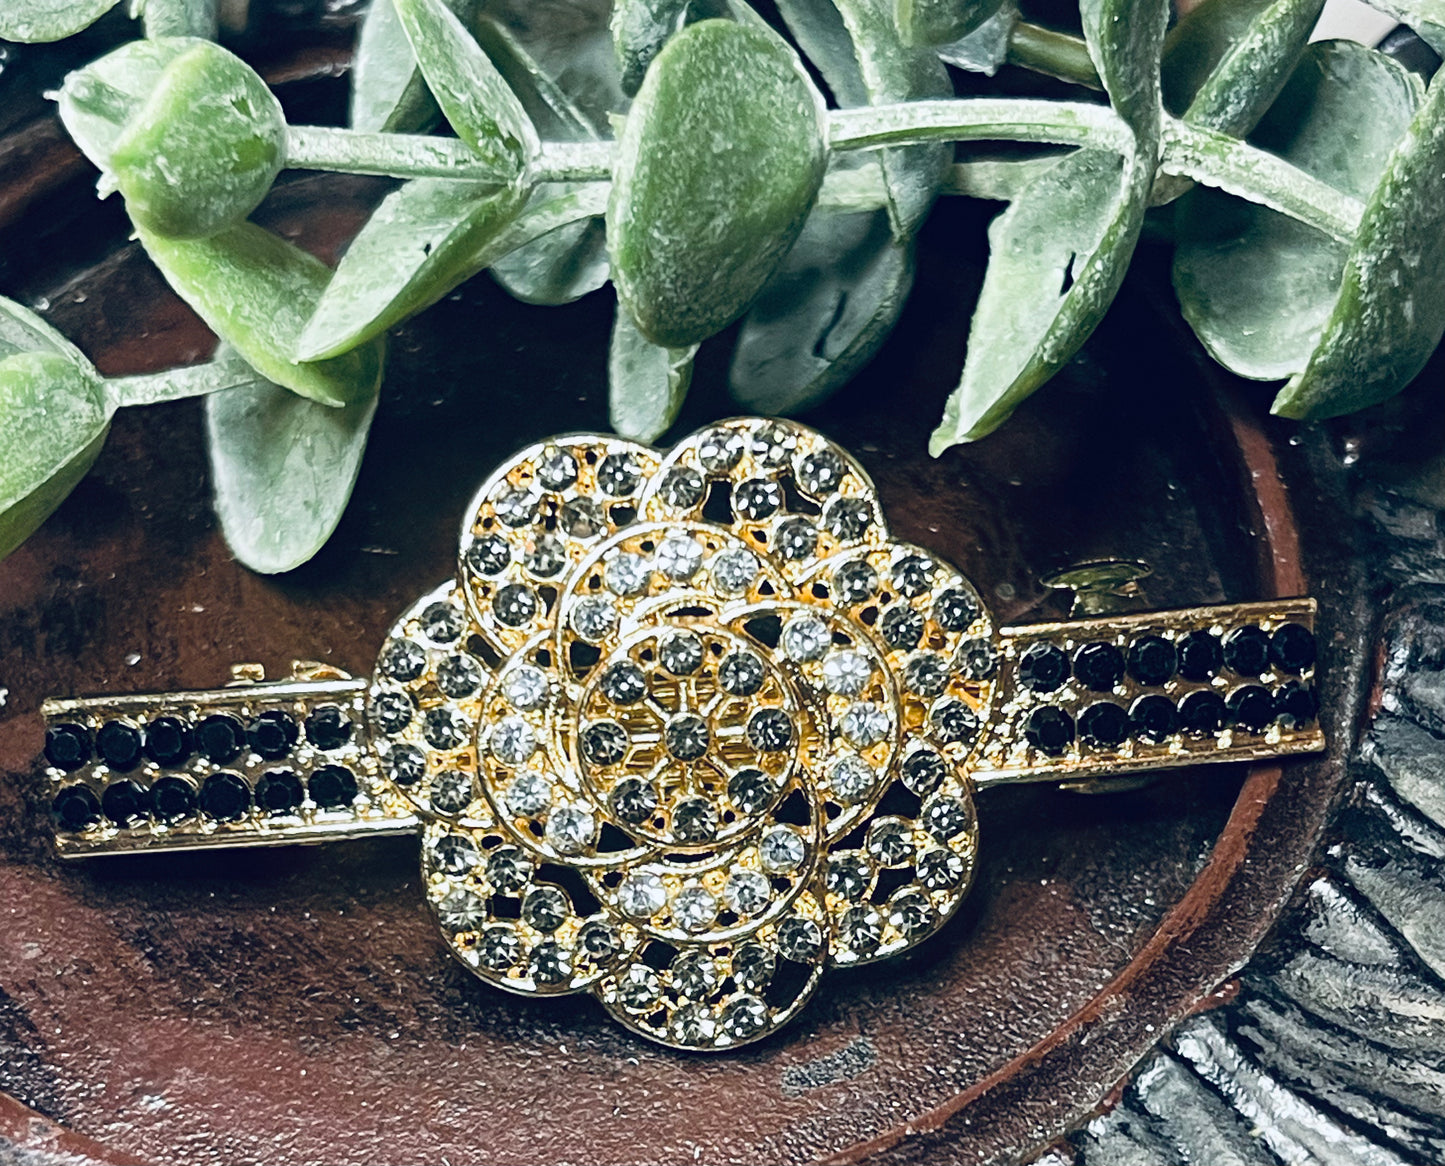 Black gray flower Crystal rhinestone barrette approximately 3.0” gold tone formal hair accessories gift wedding bridesmaid prom birthday mother of bride groom